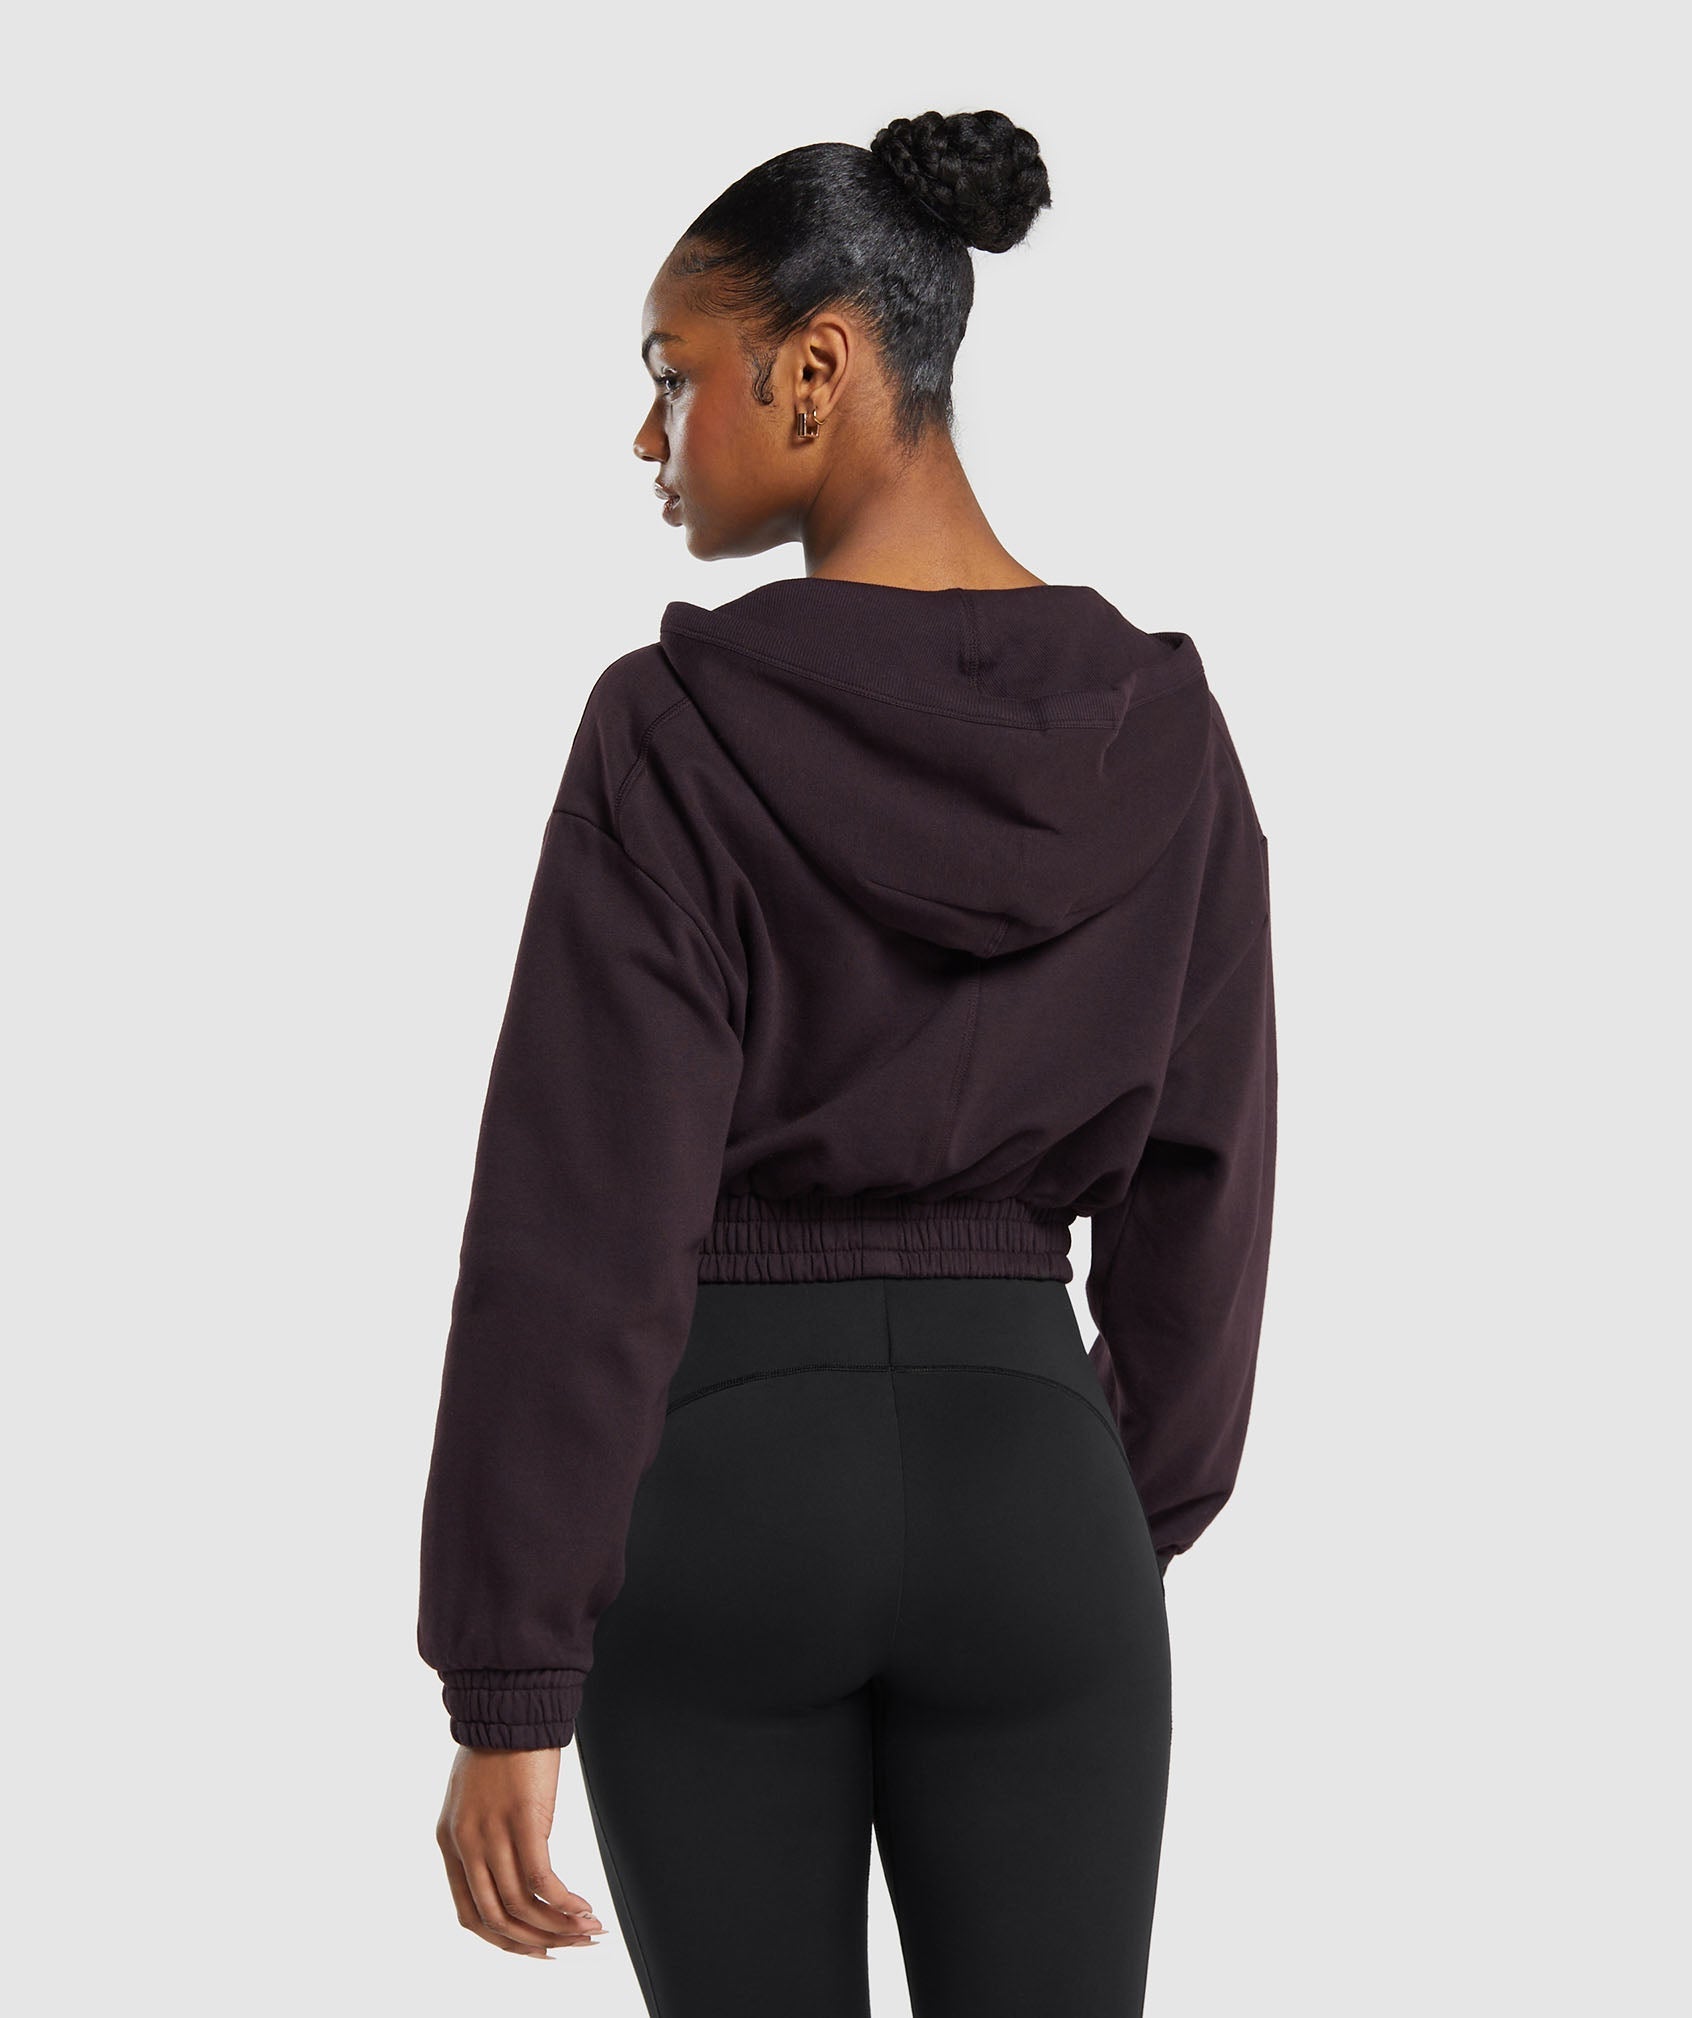 Rest Day Midi Pullover in Plum Brown - view 2